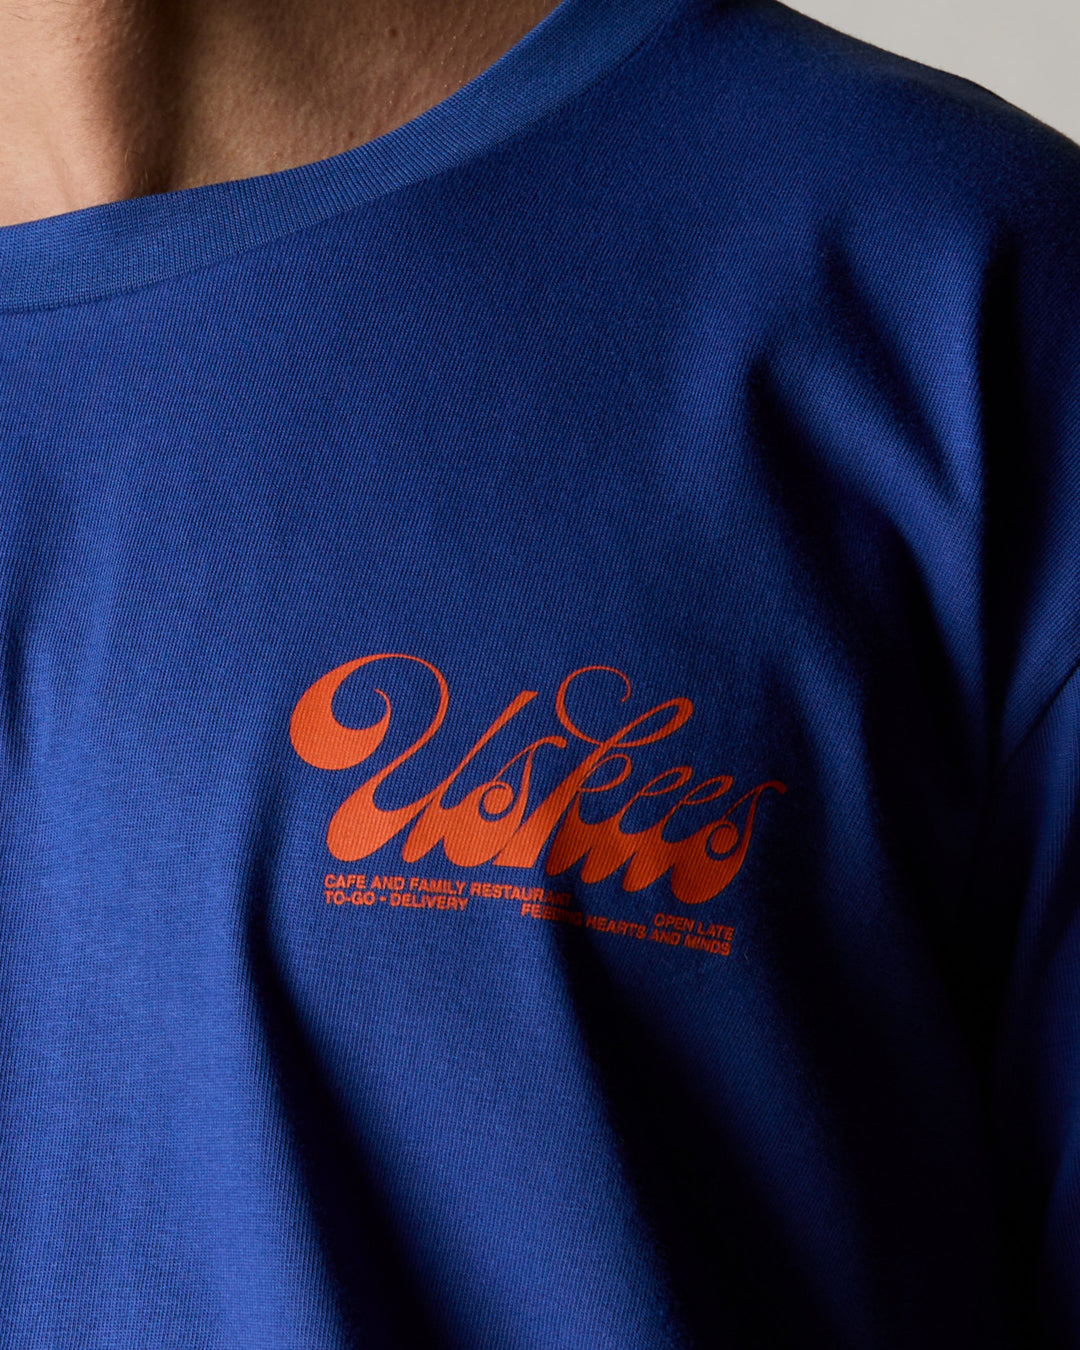  Close up shot of model wearing the uskees ultra blue baggy fit graphic Tee for men showing the 'Diner' design in orange